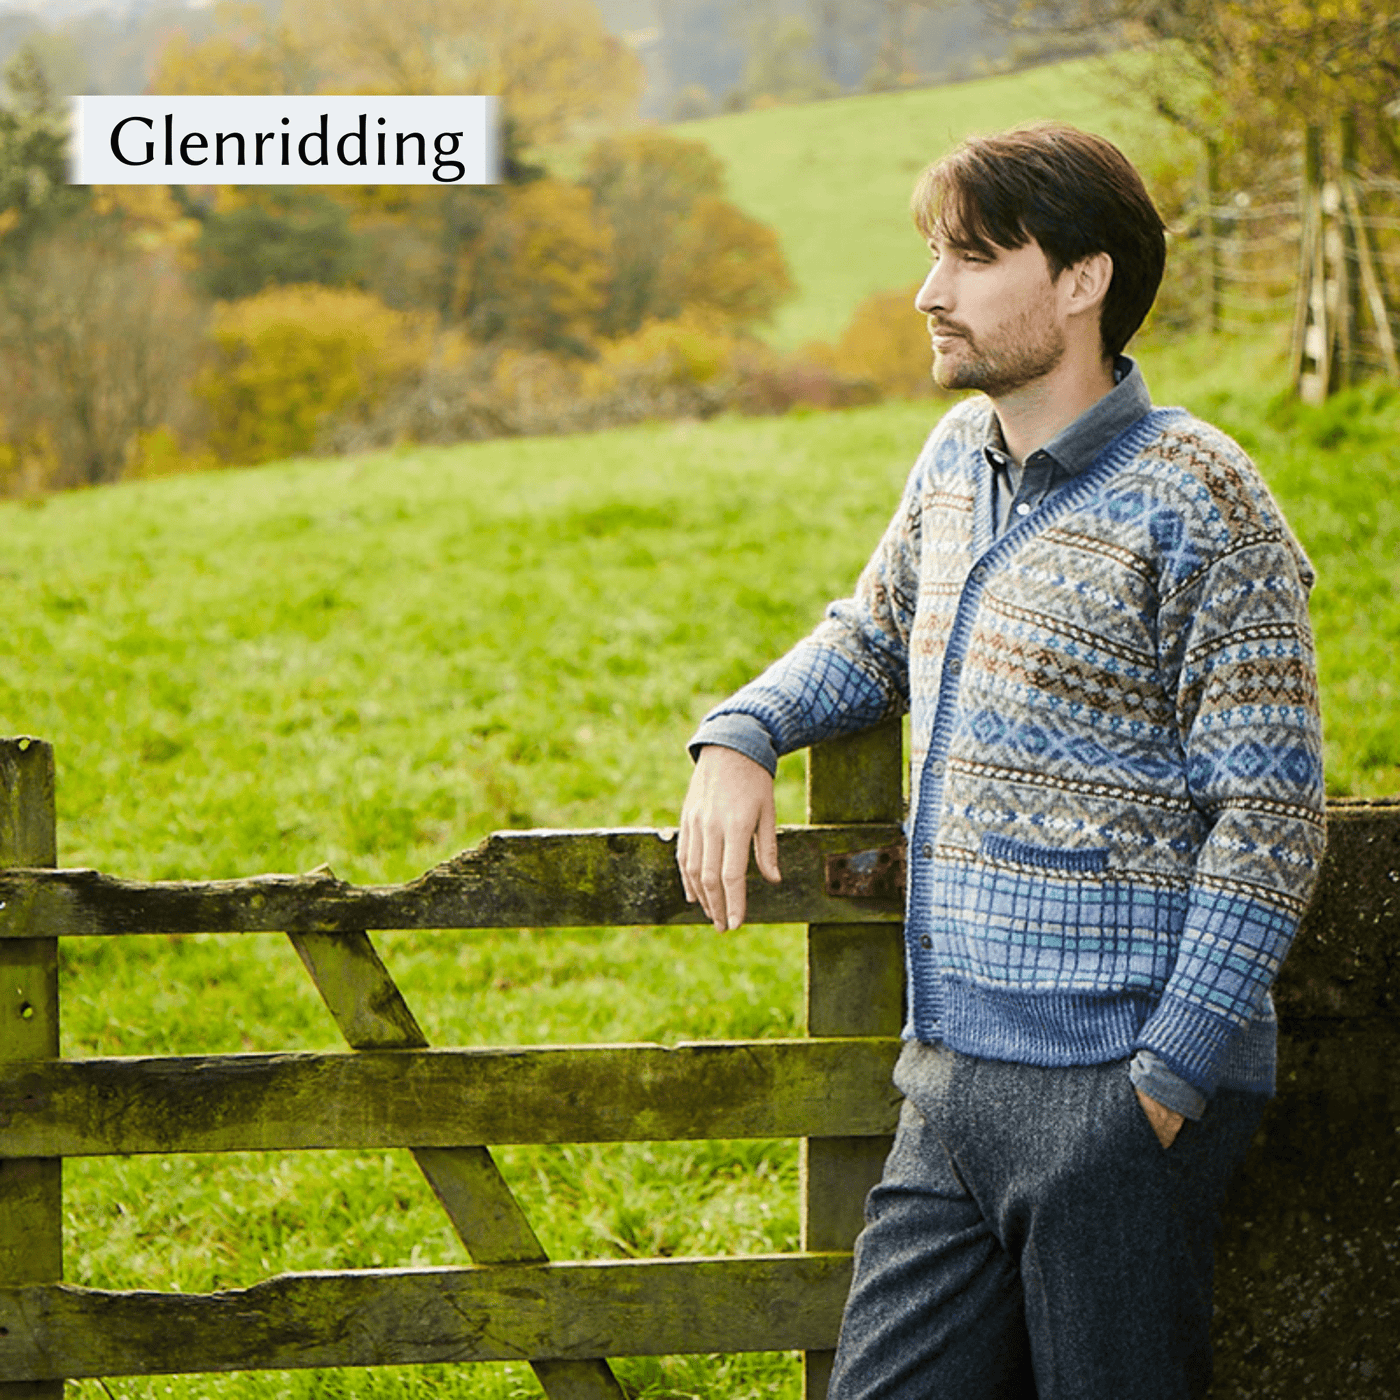 Male Model wearing Glenridding, an allover colorwork cardigan from Cumbria Book by Mare Wallin color